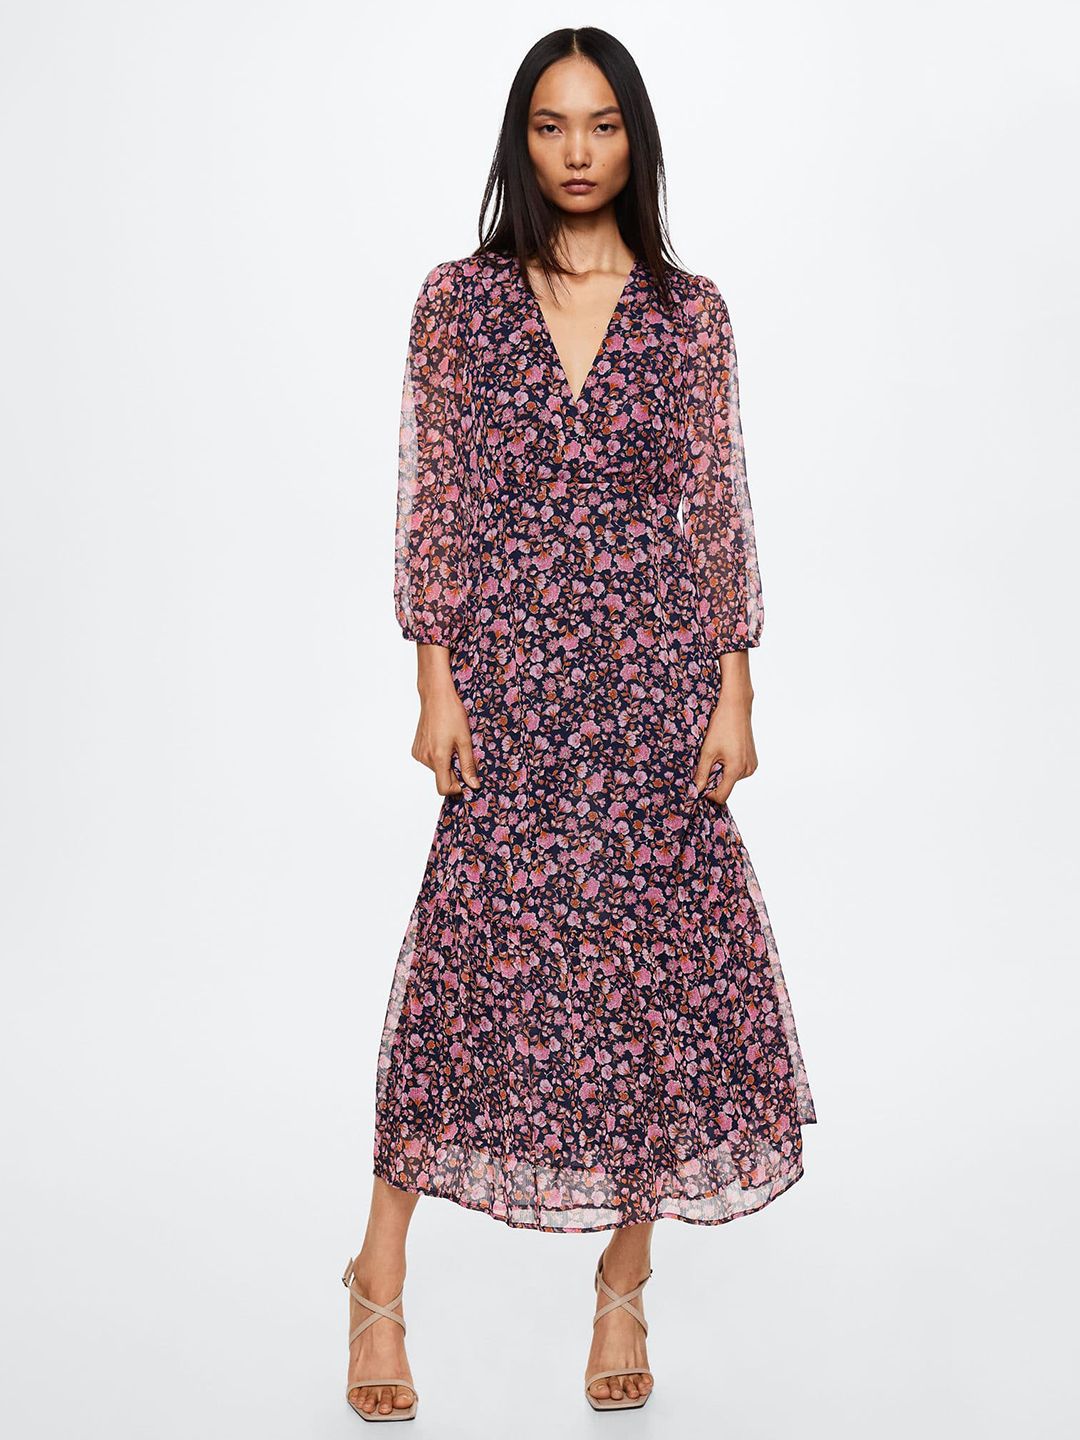 MANGO Navy Blue & Pink Floral Maxi Dress Price in India